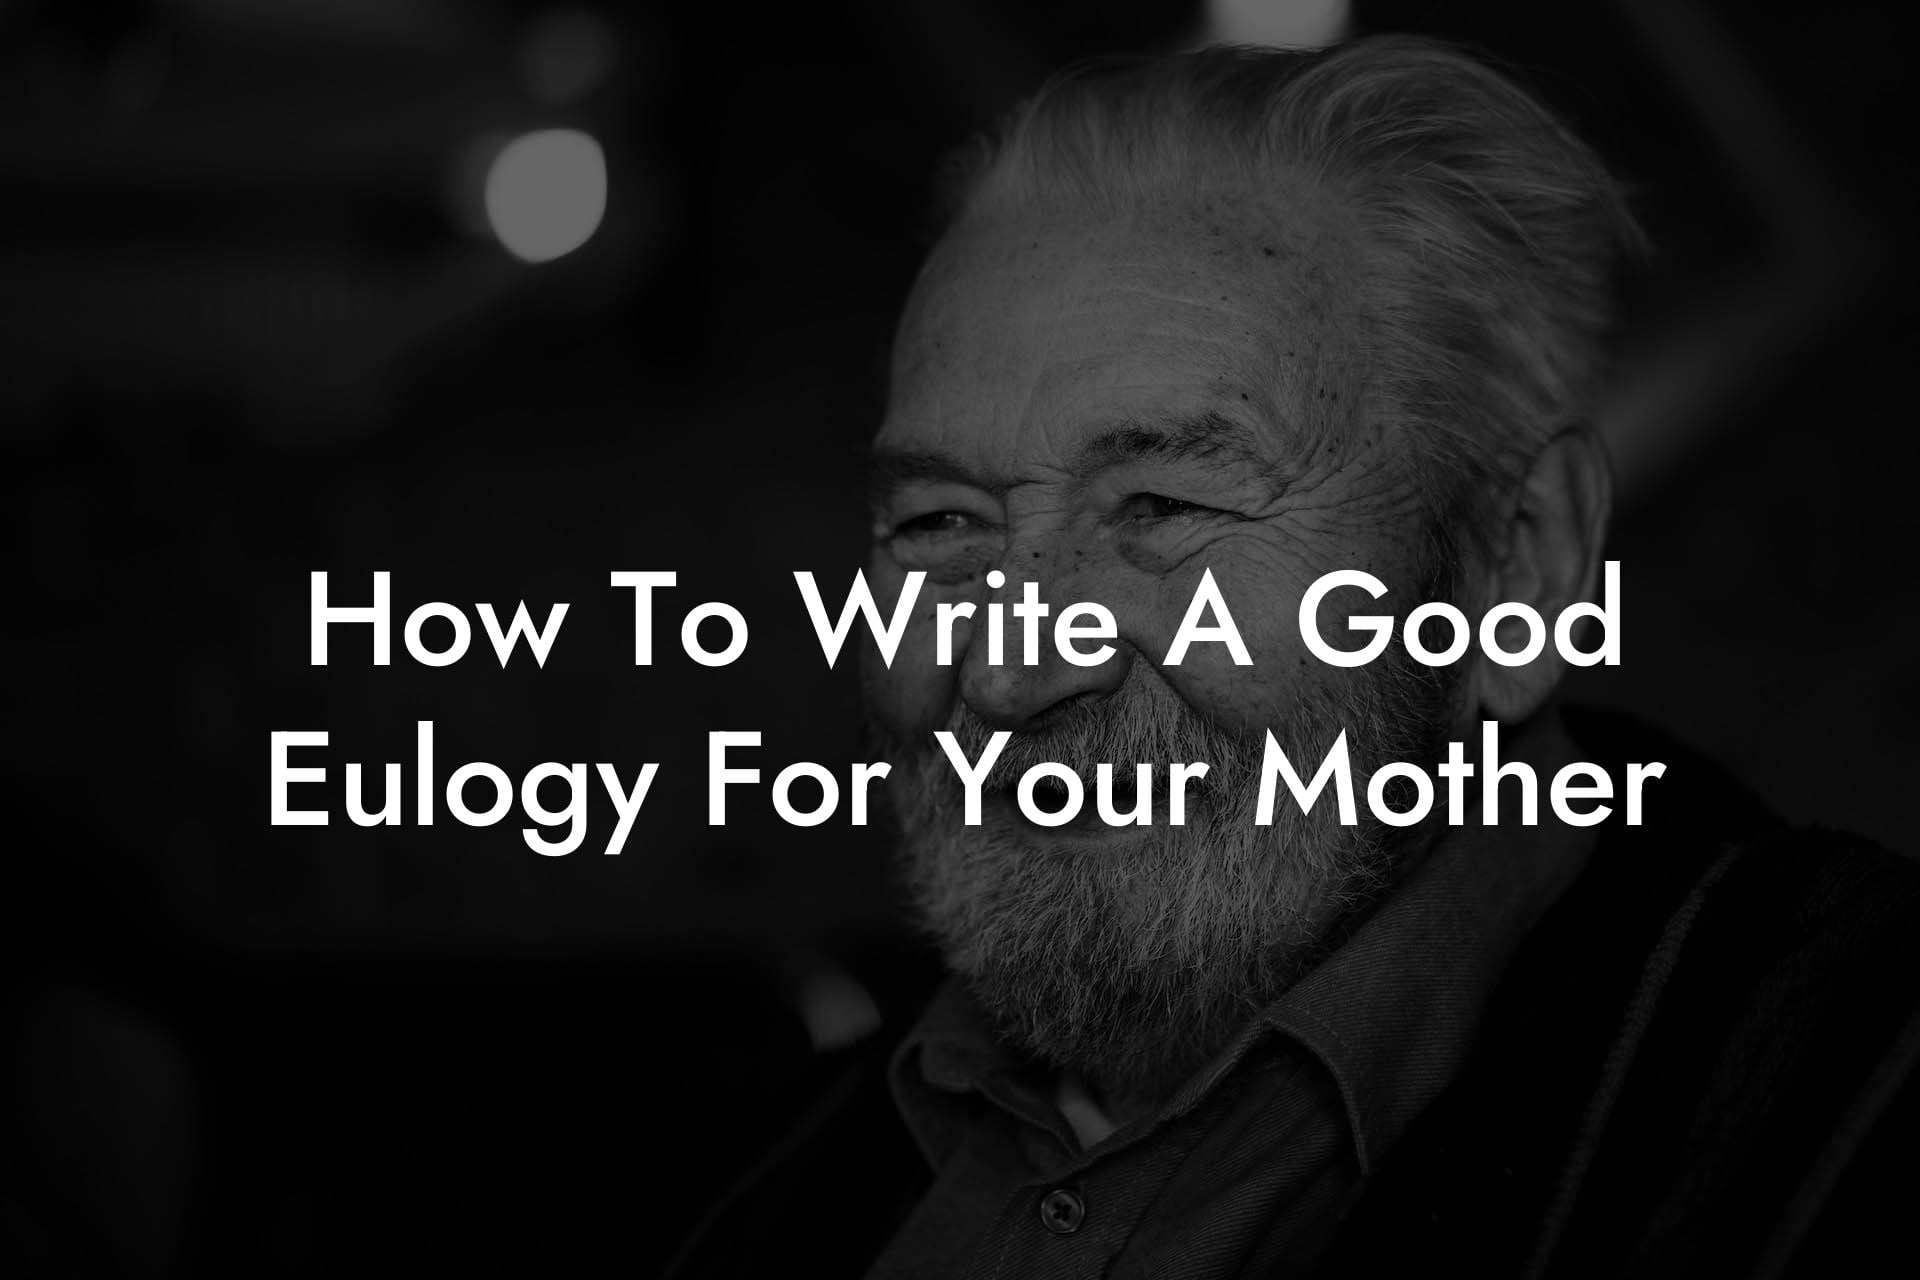 How To Write A Good Eulogy For Your Mother